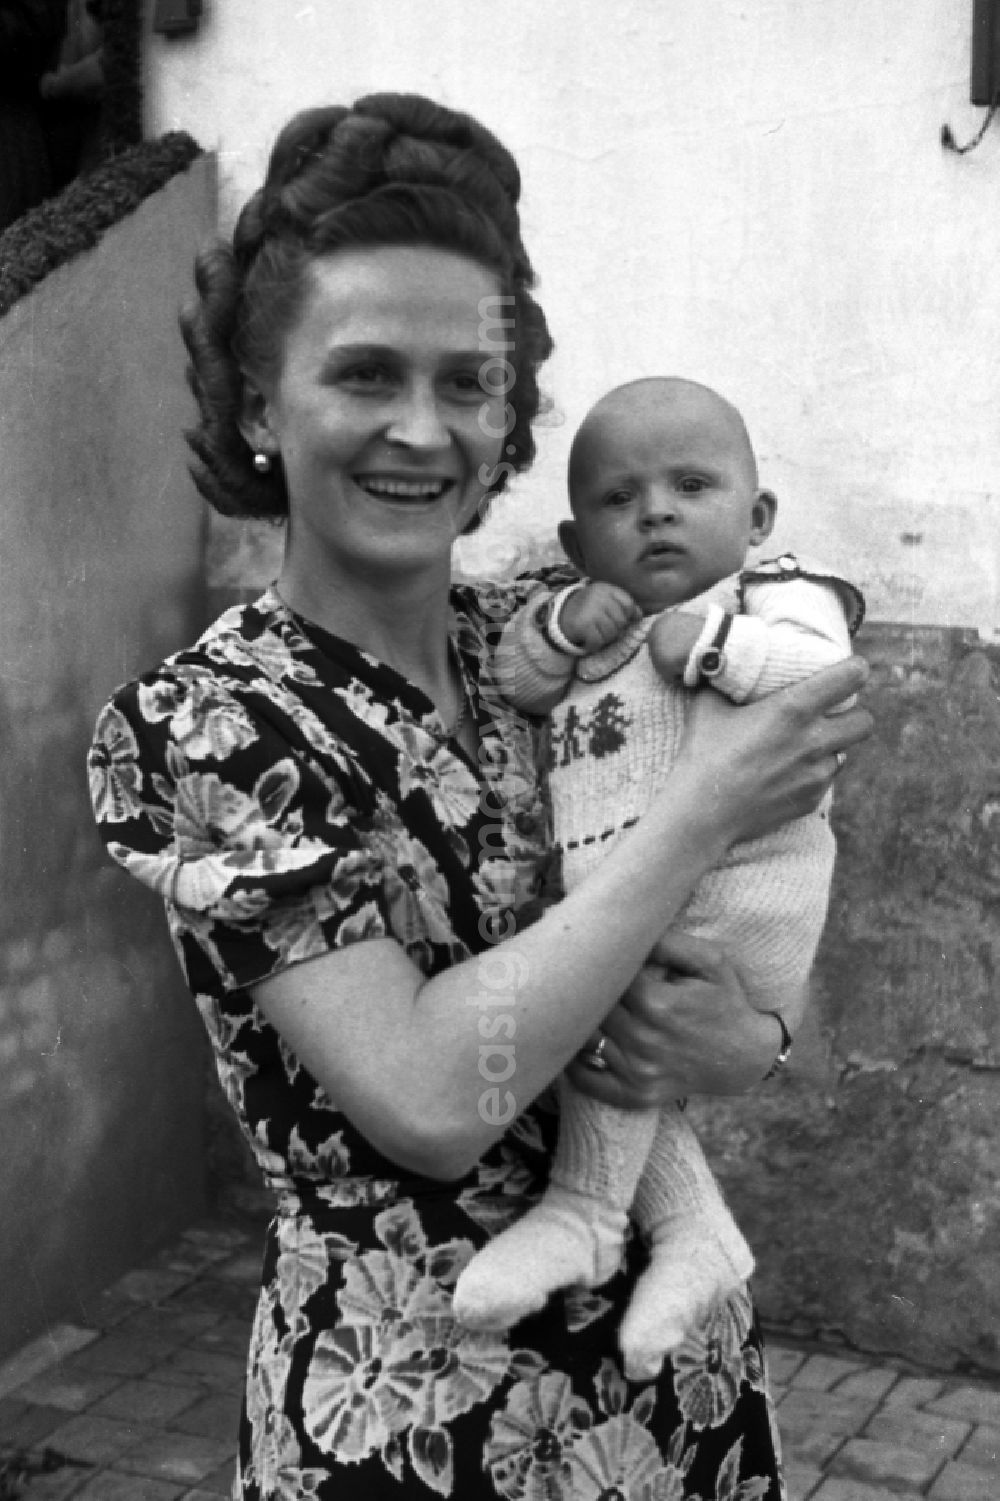 GDR image archive: Merseburg - A woman holds a baby on the arm in Merseburg in the federal state Saxony-Anhalt in the area of the former GDR, German democratic republic